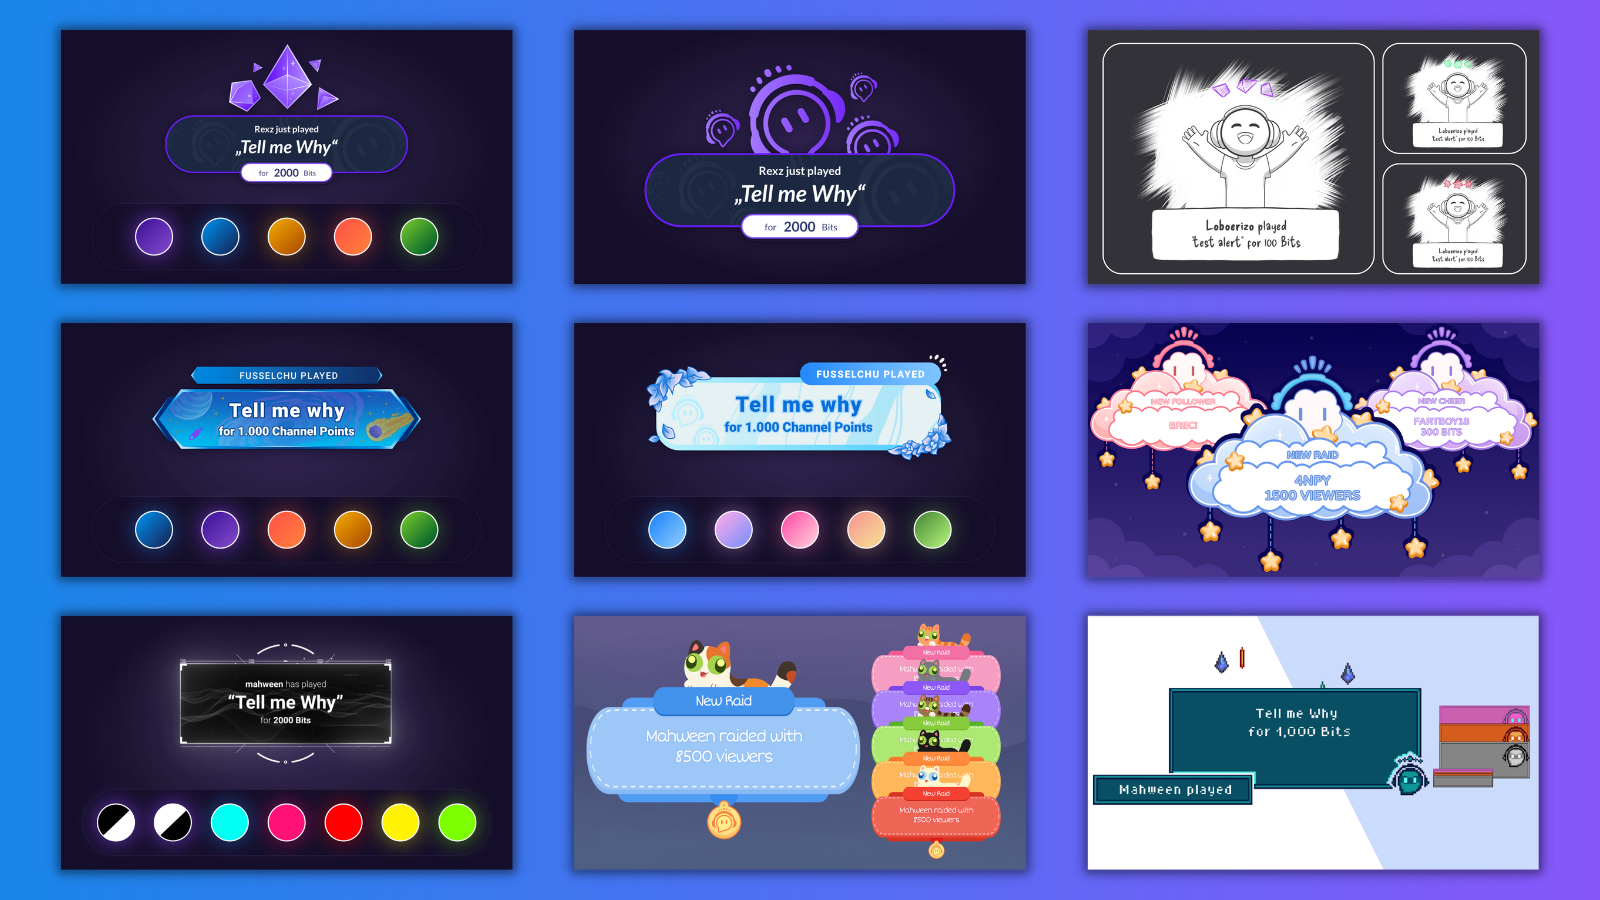 This image shows the 9 initial designs of the Alert Animation Store of Sound Alerts.